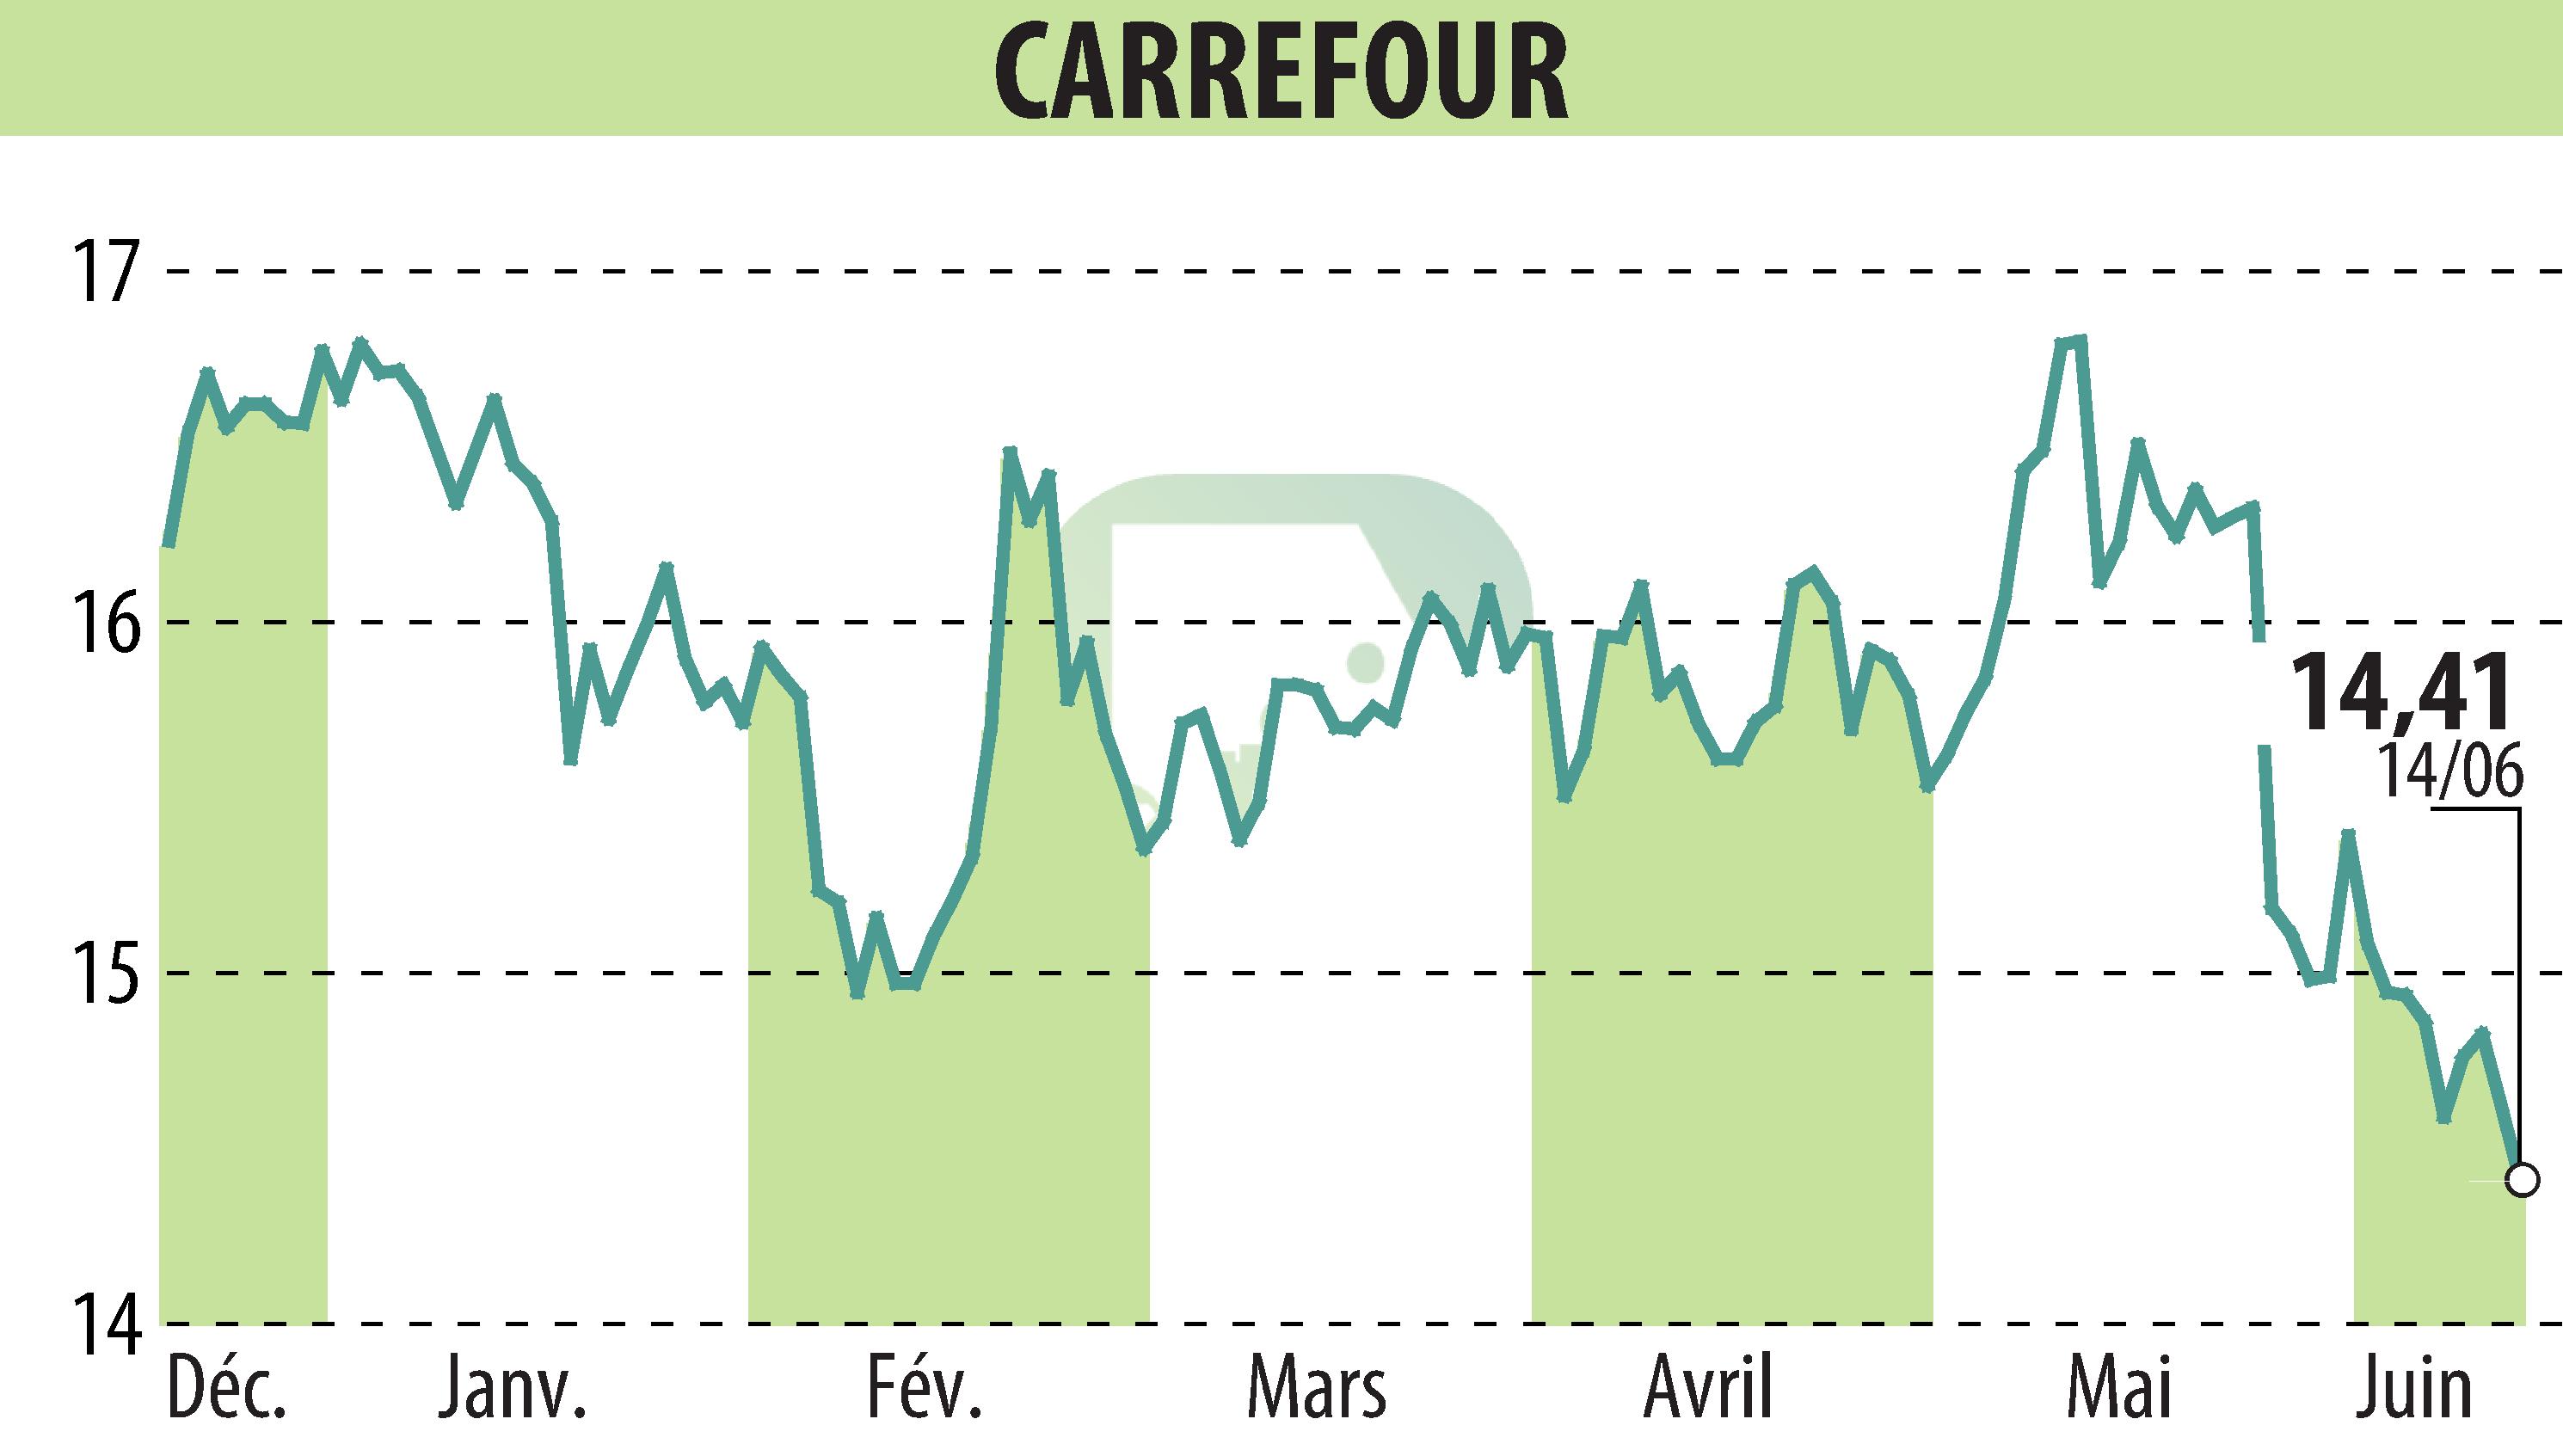 Stock price chart of CARREFOUR (EPA:CA) showing fluctuations.